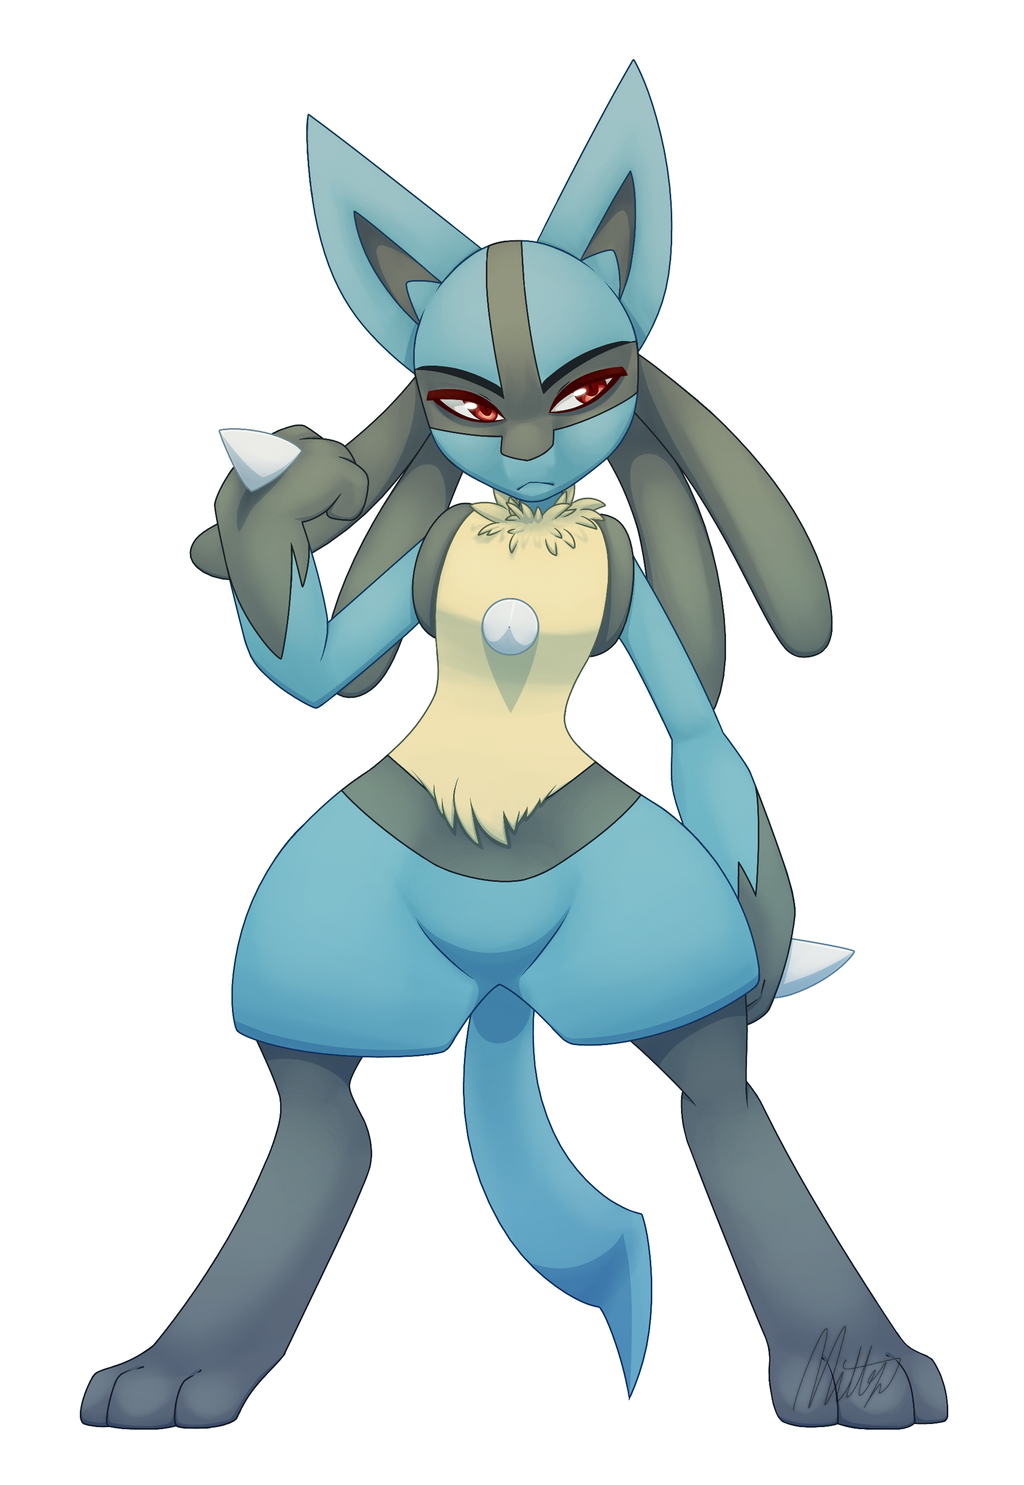 lucario by Mittz-The-Trash-Lord on DeviantArt